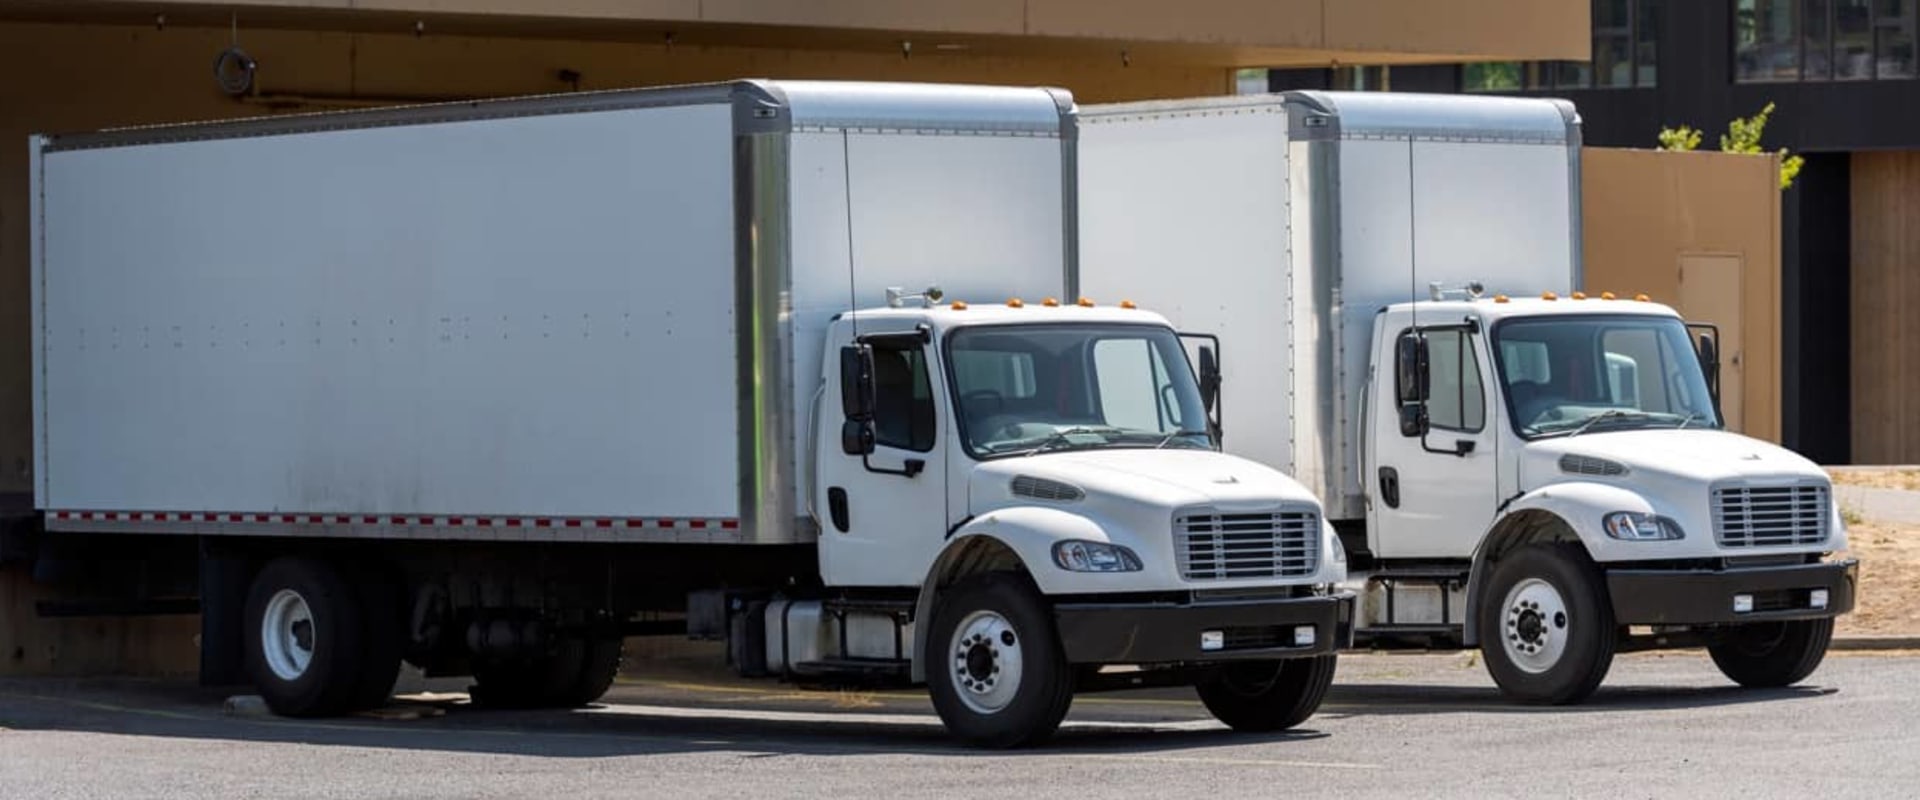 What is the largest penske truck you can rent?